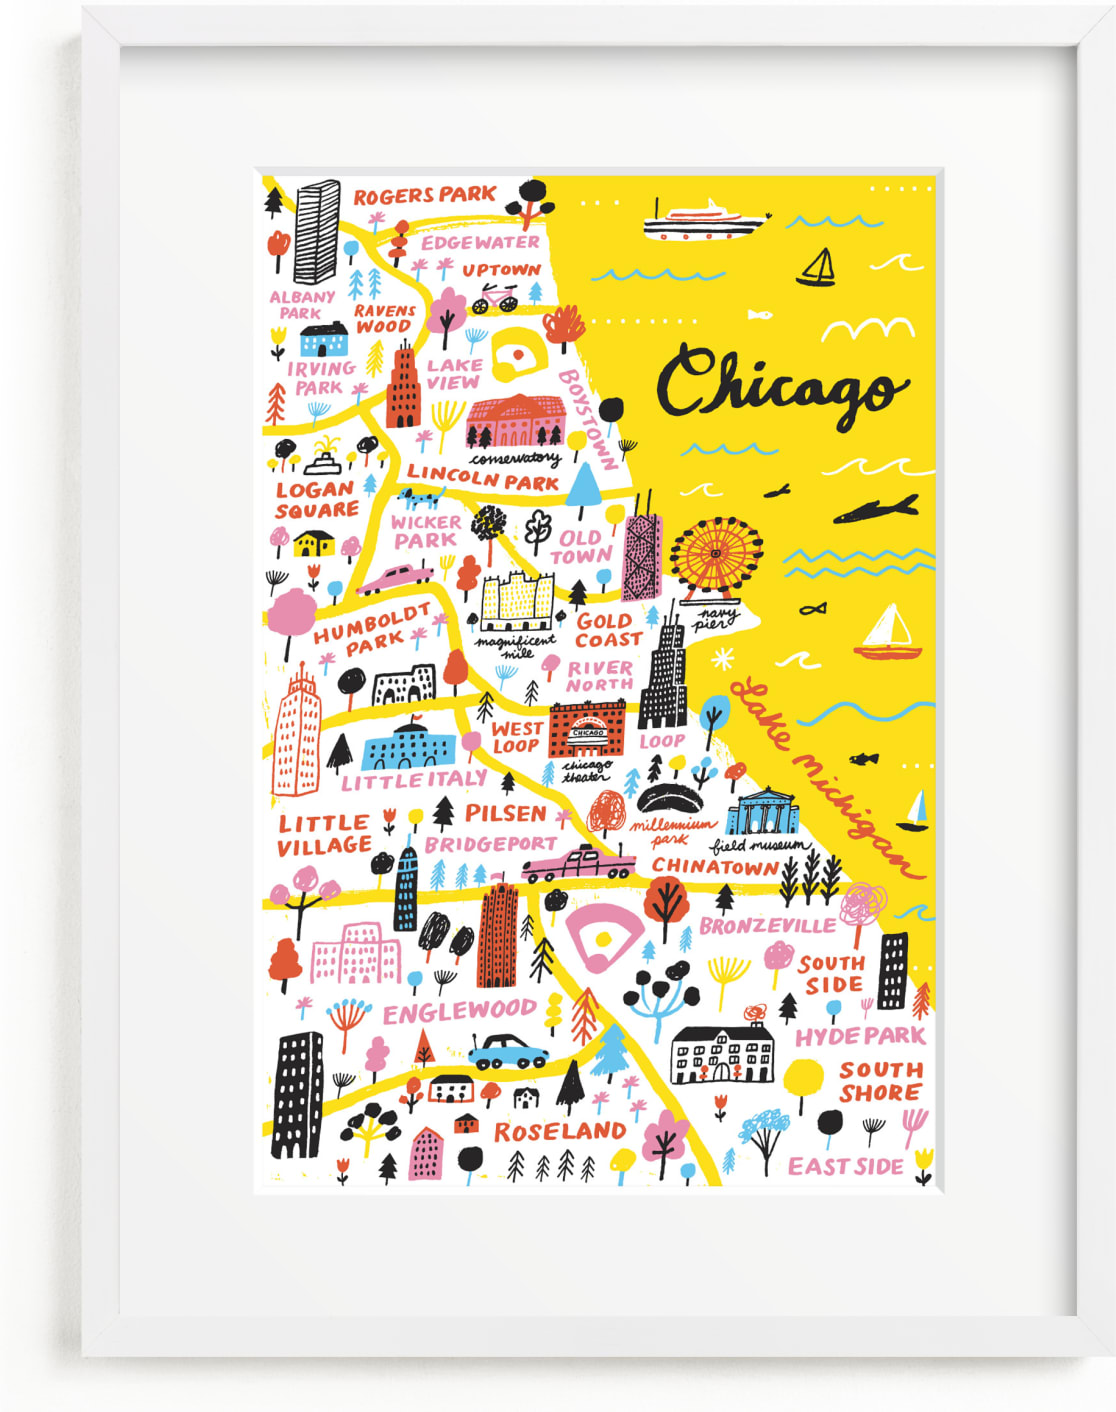 This is a colorful art by Jordan Sondler called I Love Chicago.